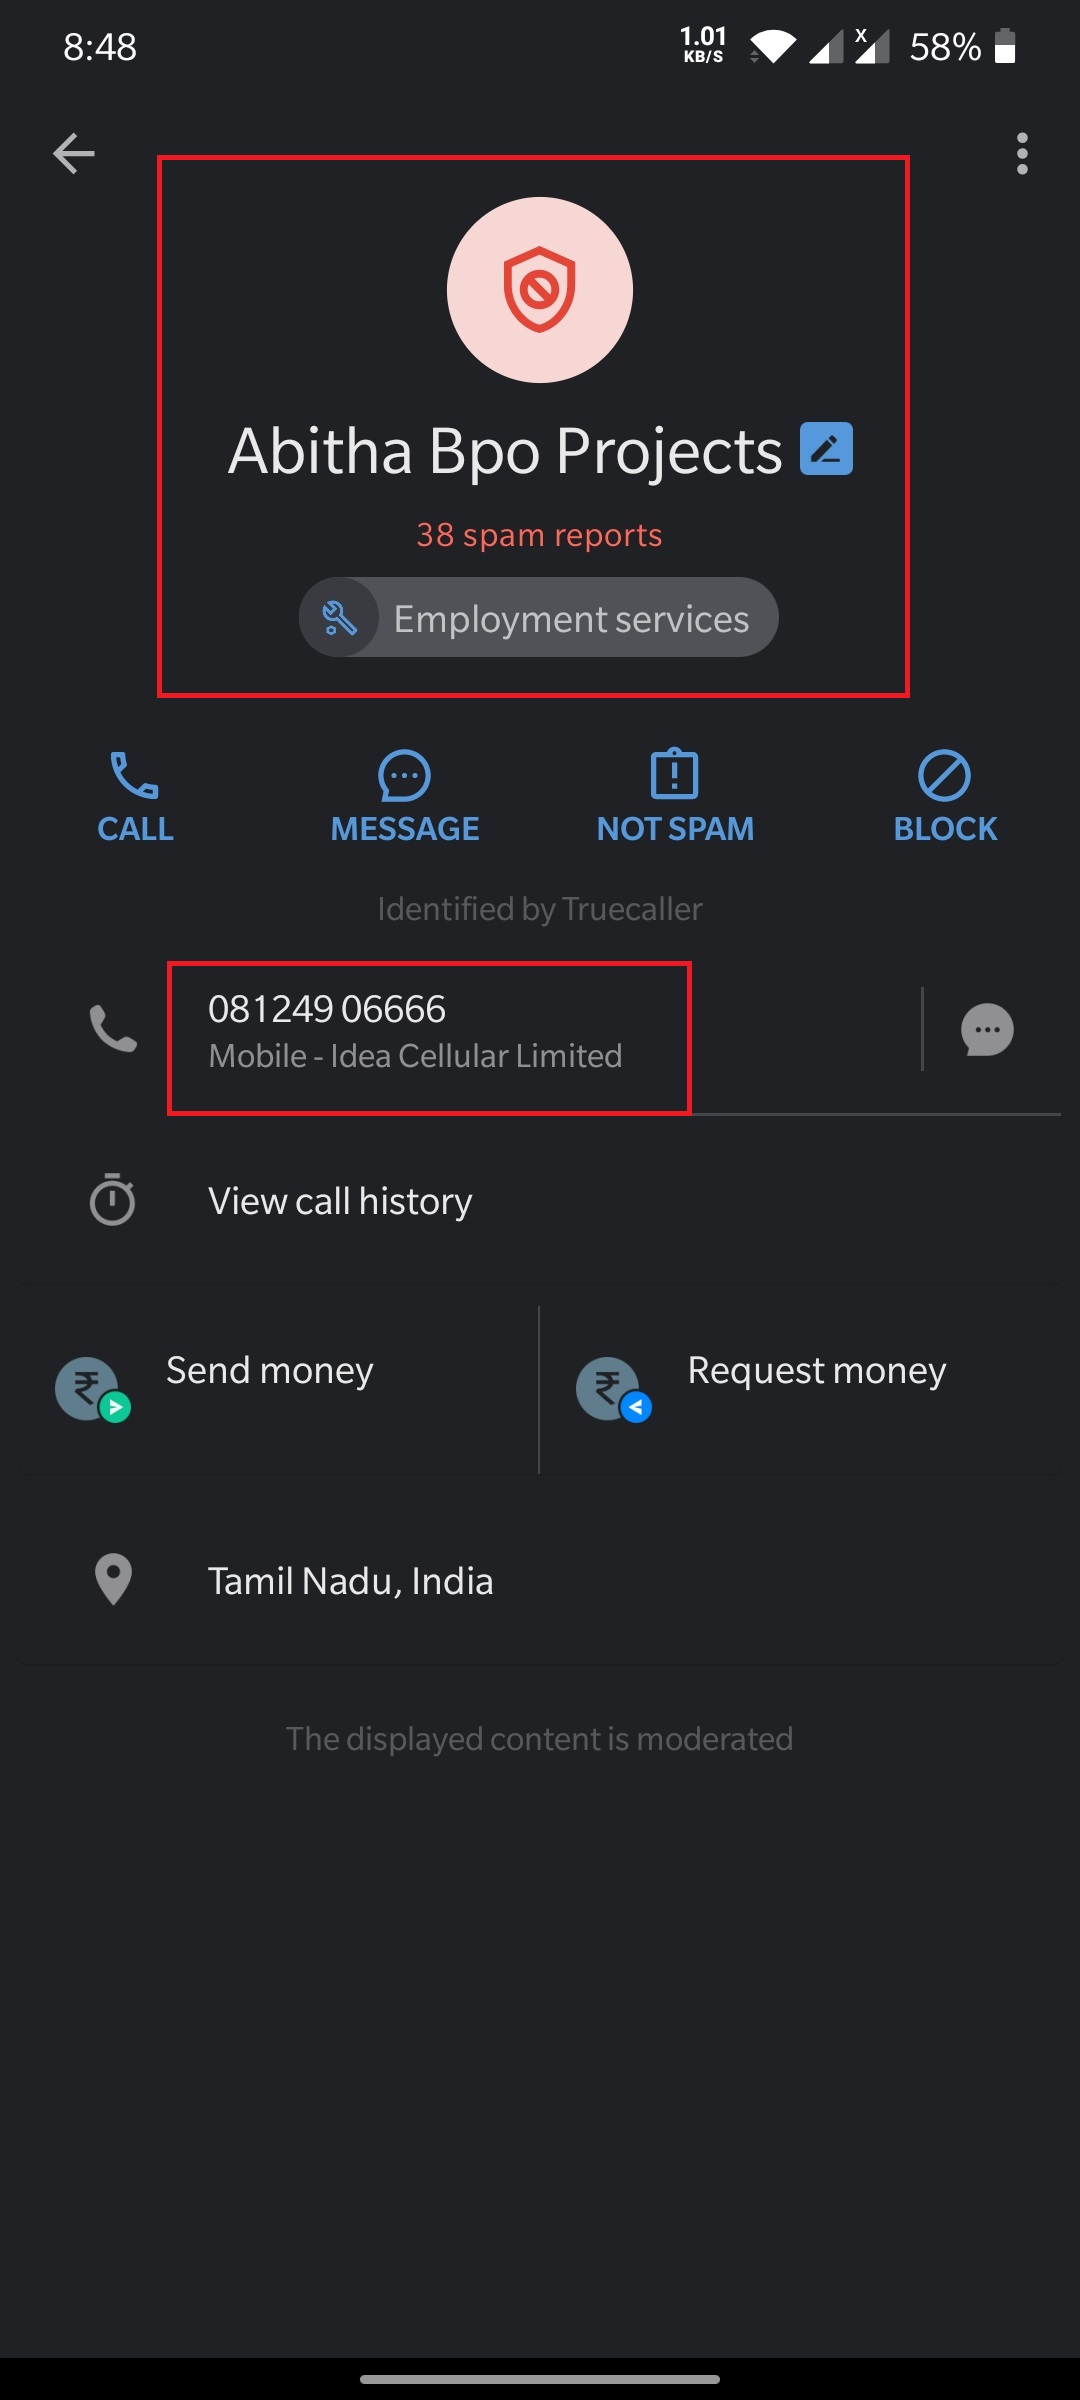 bpo projects provider india phone number truecaller spam 5